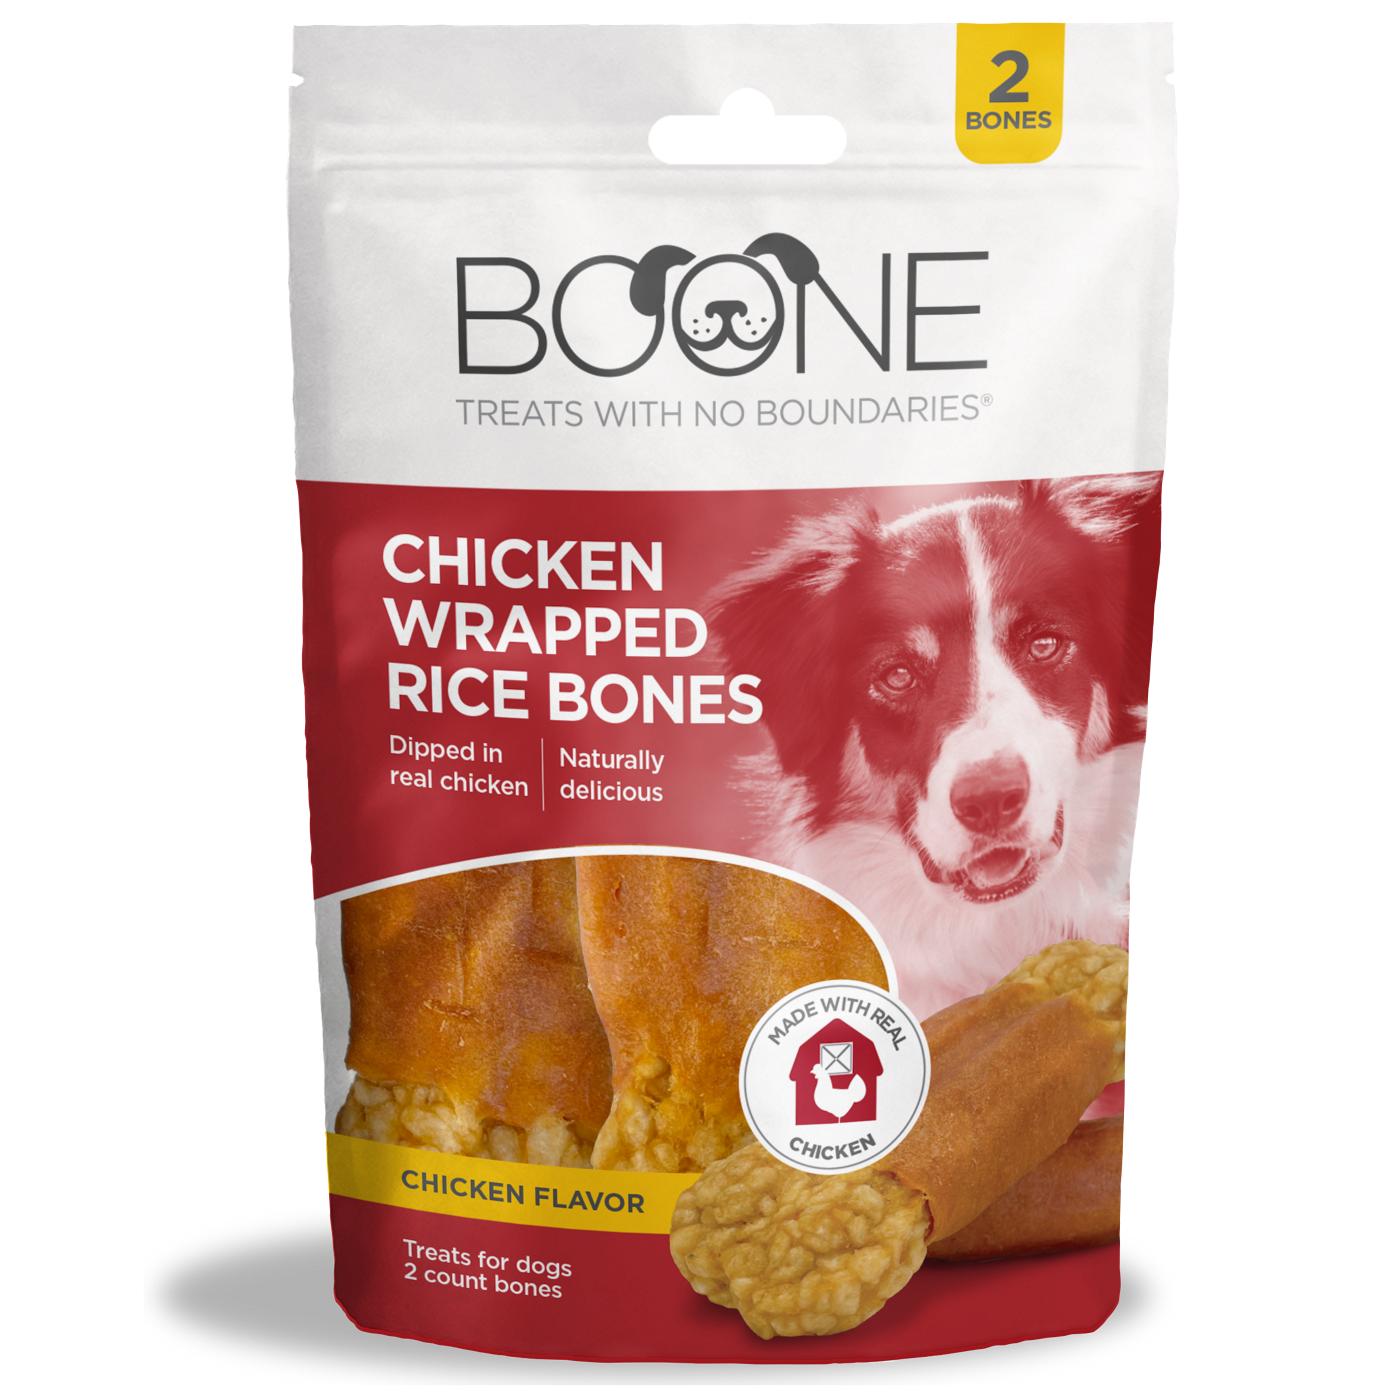 Boone Chicken Wrapped Rice Bones Dog Treats; image 1 of 2